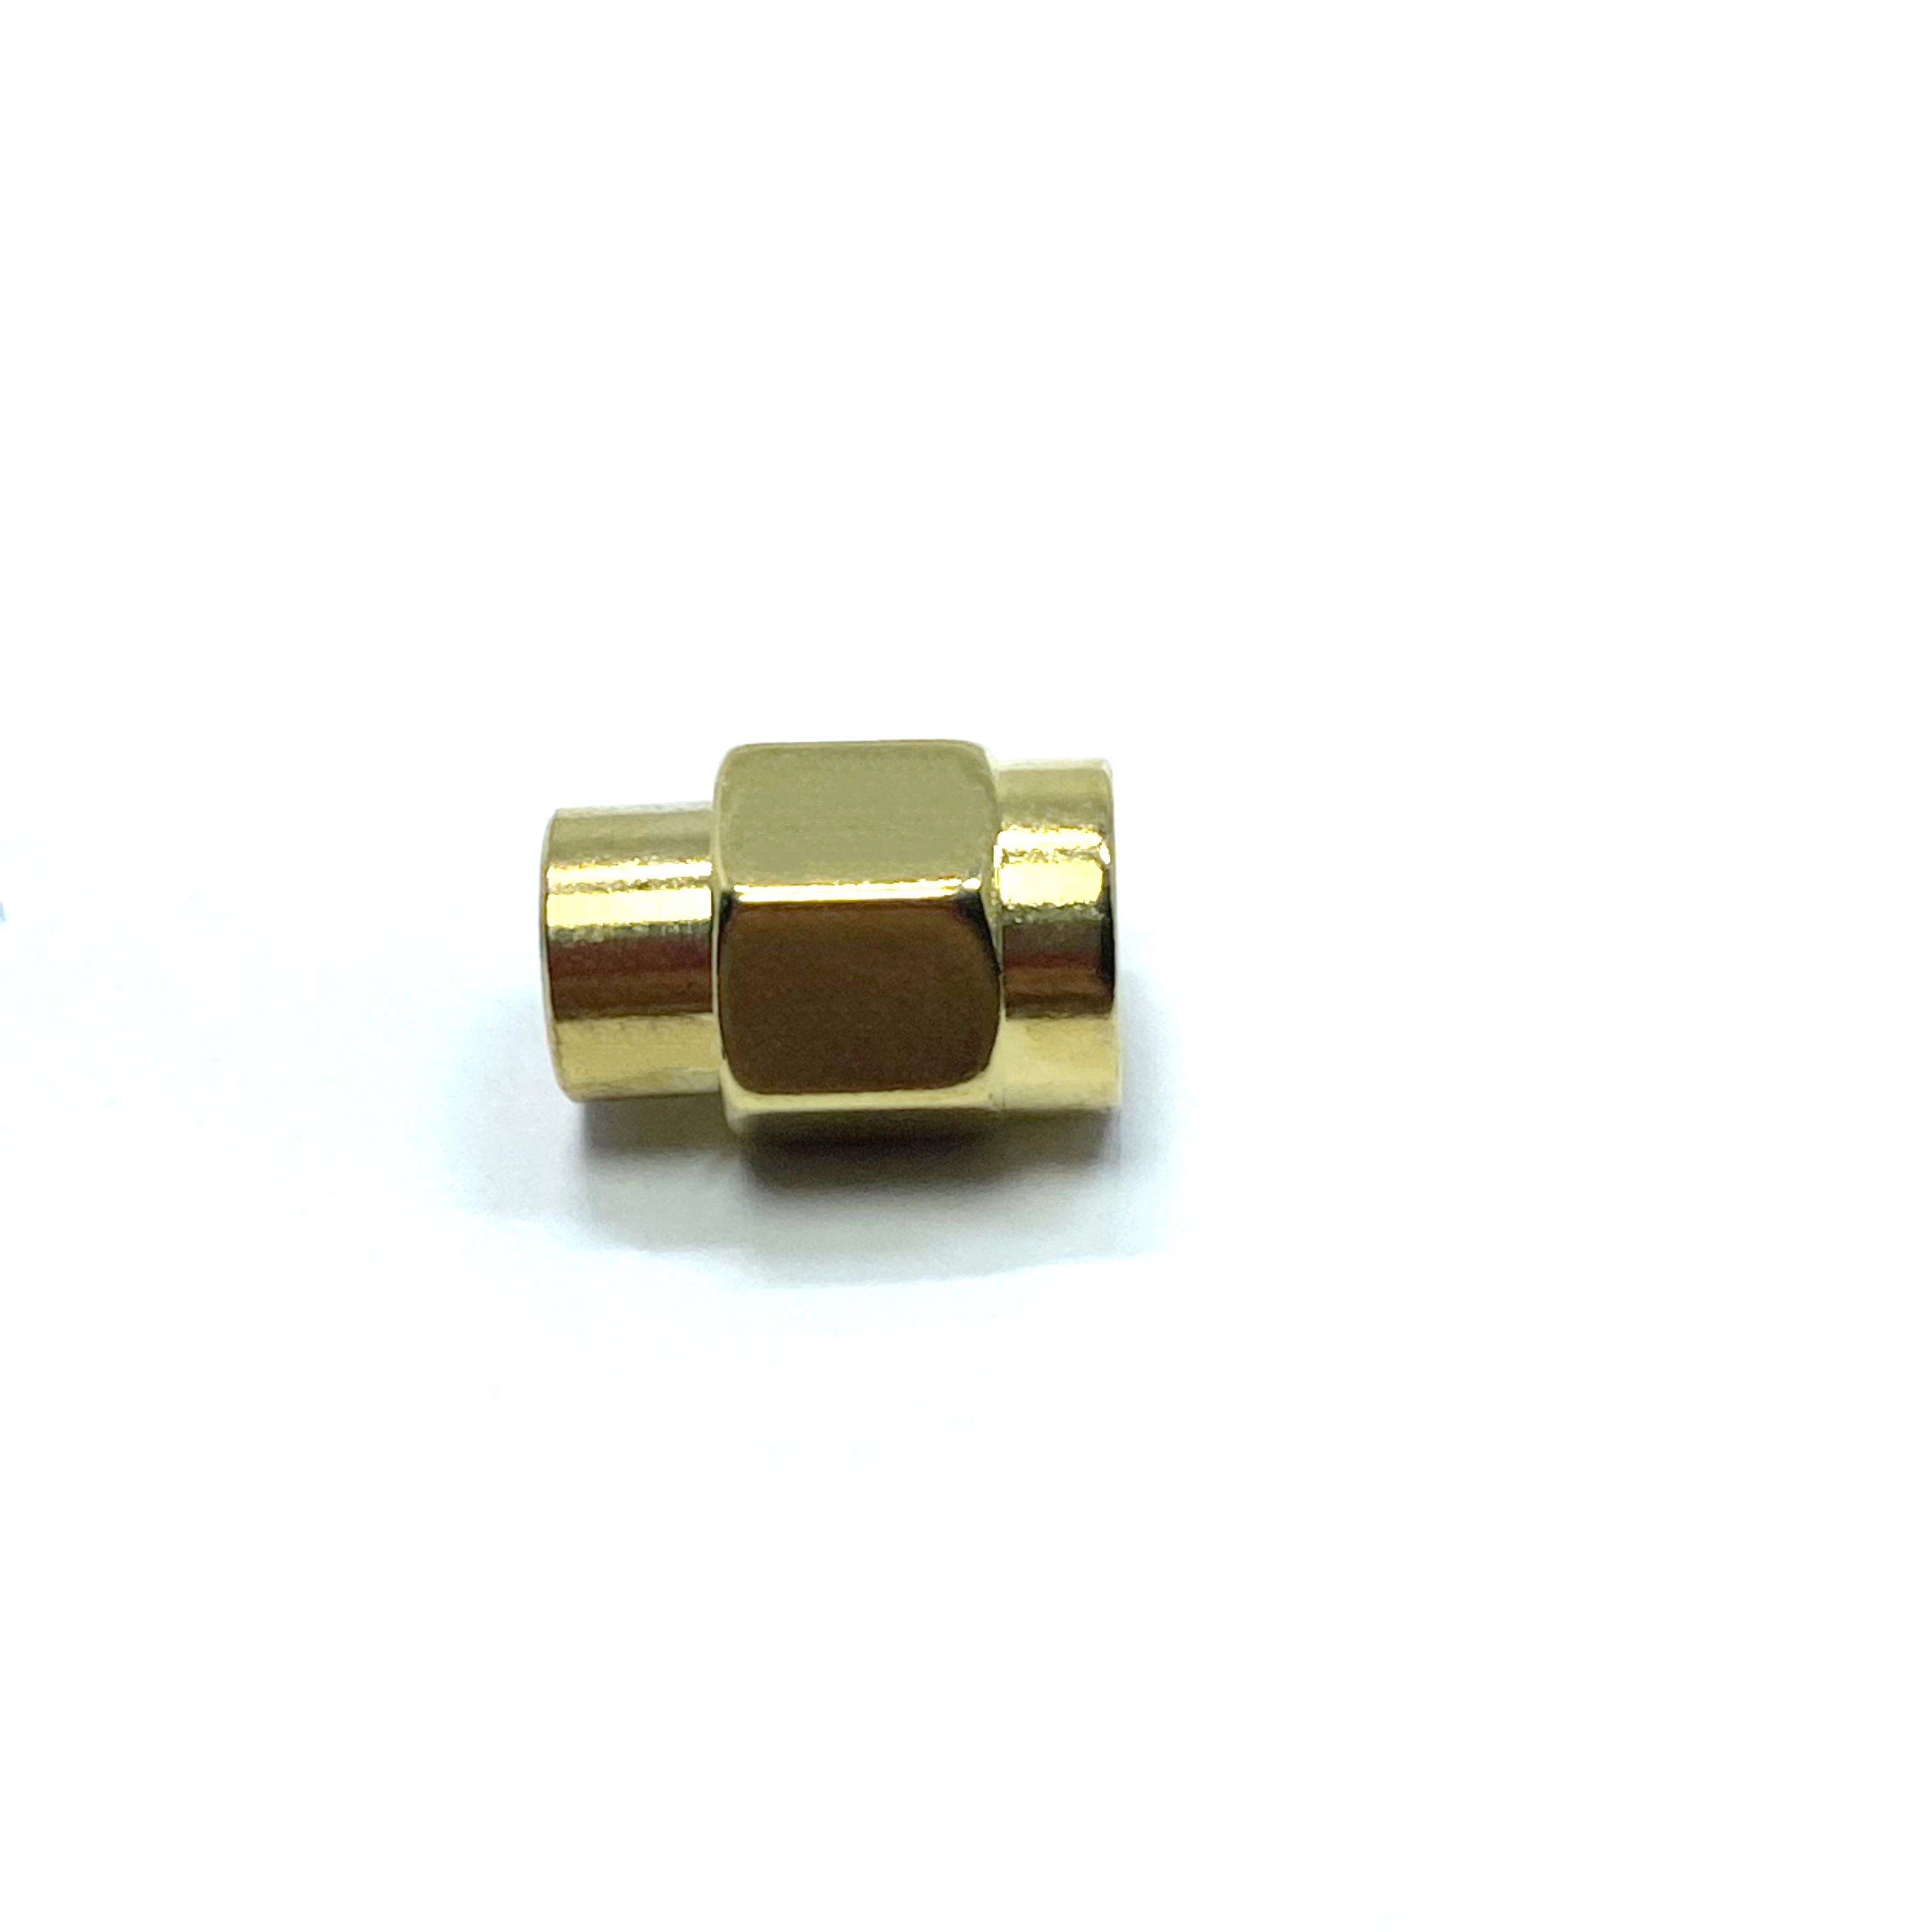 Factory Price Gold Plated Straight 2 Watt 50 Ohm SMA Plug Male RF Coaxial Termination Dummy Loads in stock manufacture